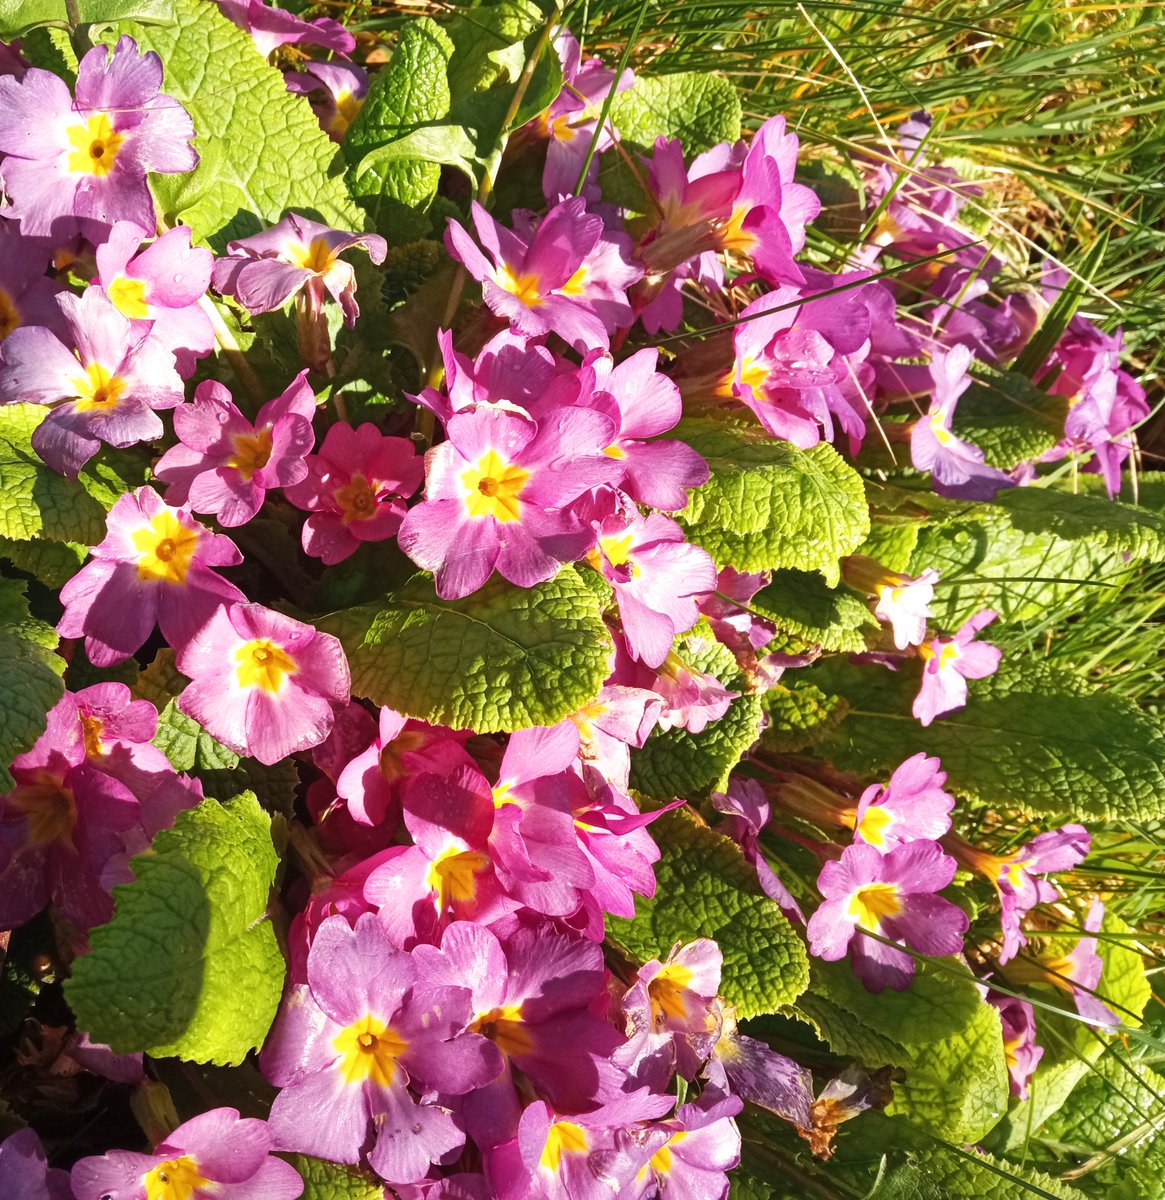 Primroses getting sunshine and showers today!!